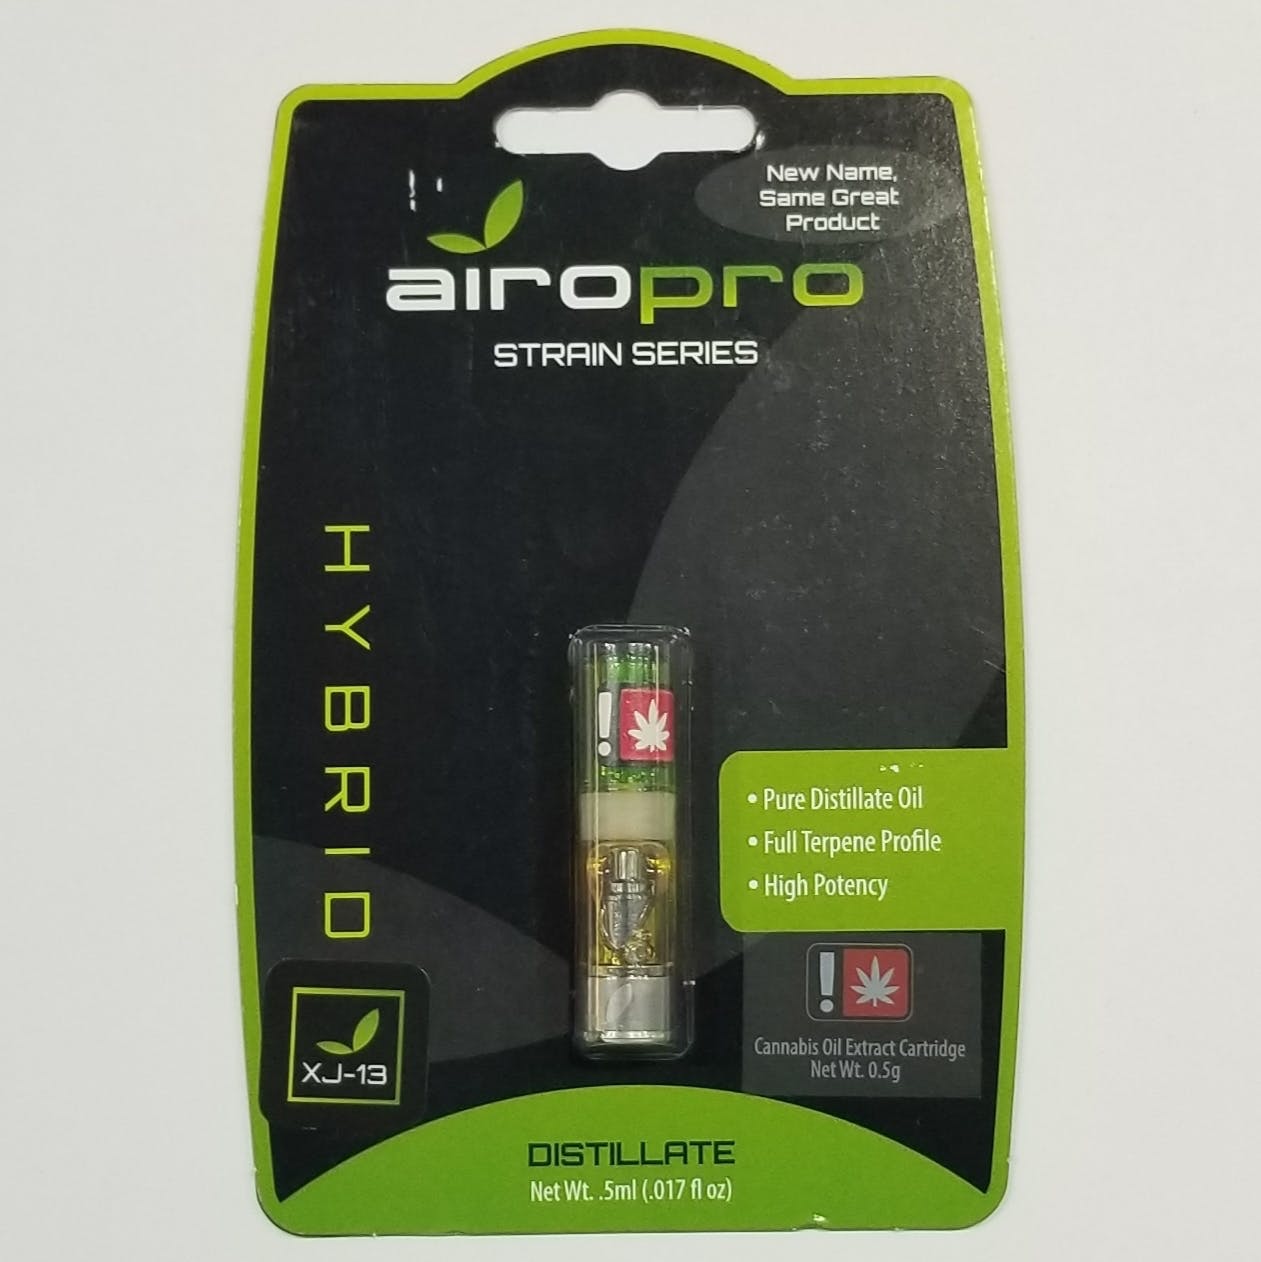 concentrate-5g-x-j-13-cartridge-airo-pro